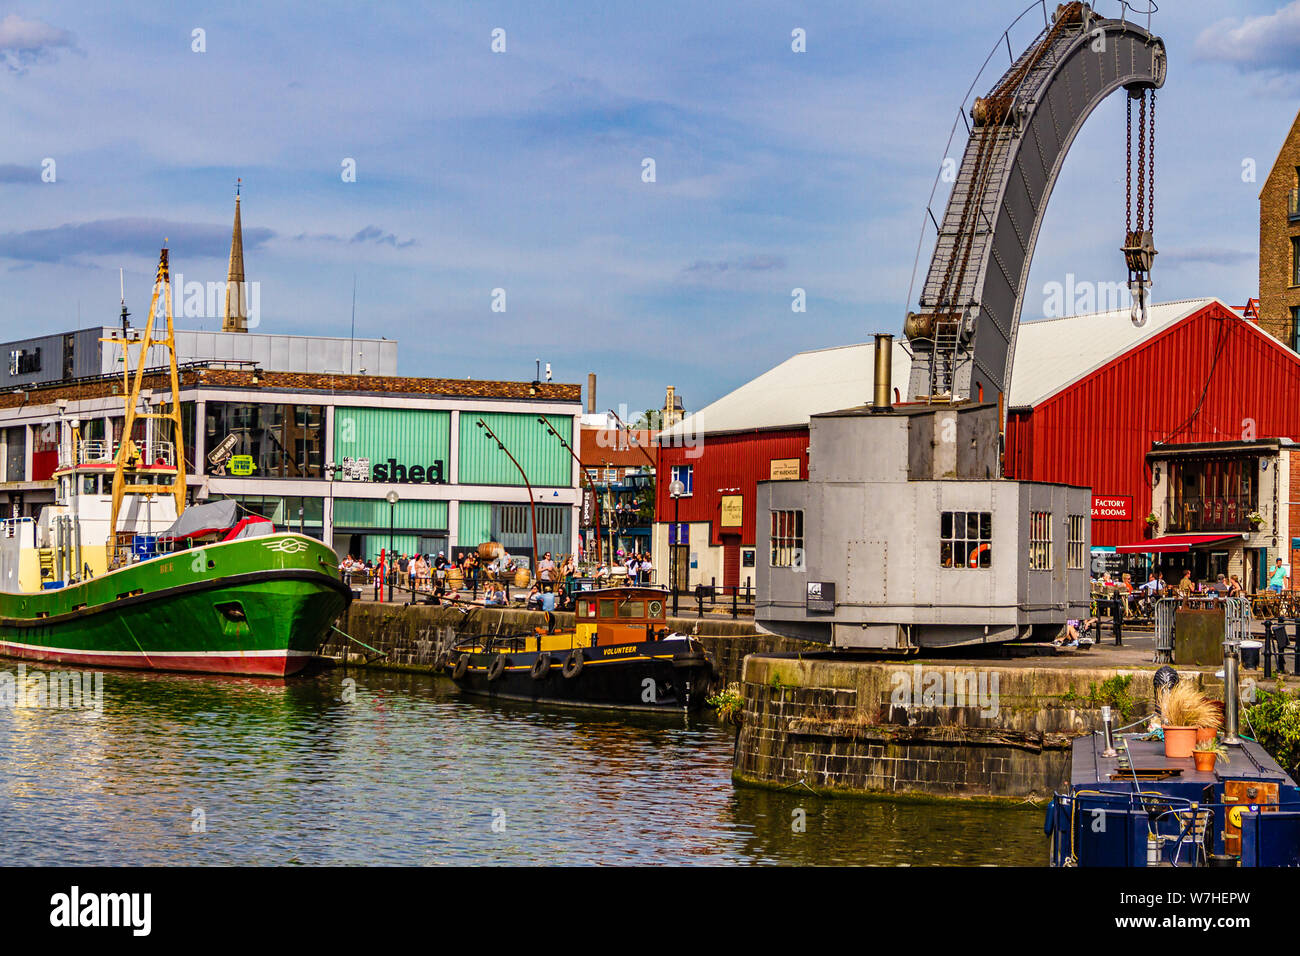 Historic vessels moored outside Bristol's M-Shed heritage museum, alongside the Fairbairn steam crane. Prince's Wharf, Bristol, UK. July 2019. Stock Photo